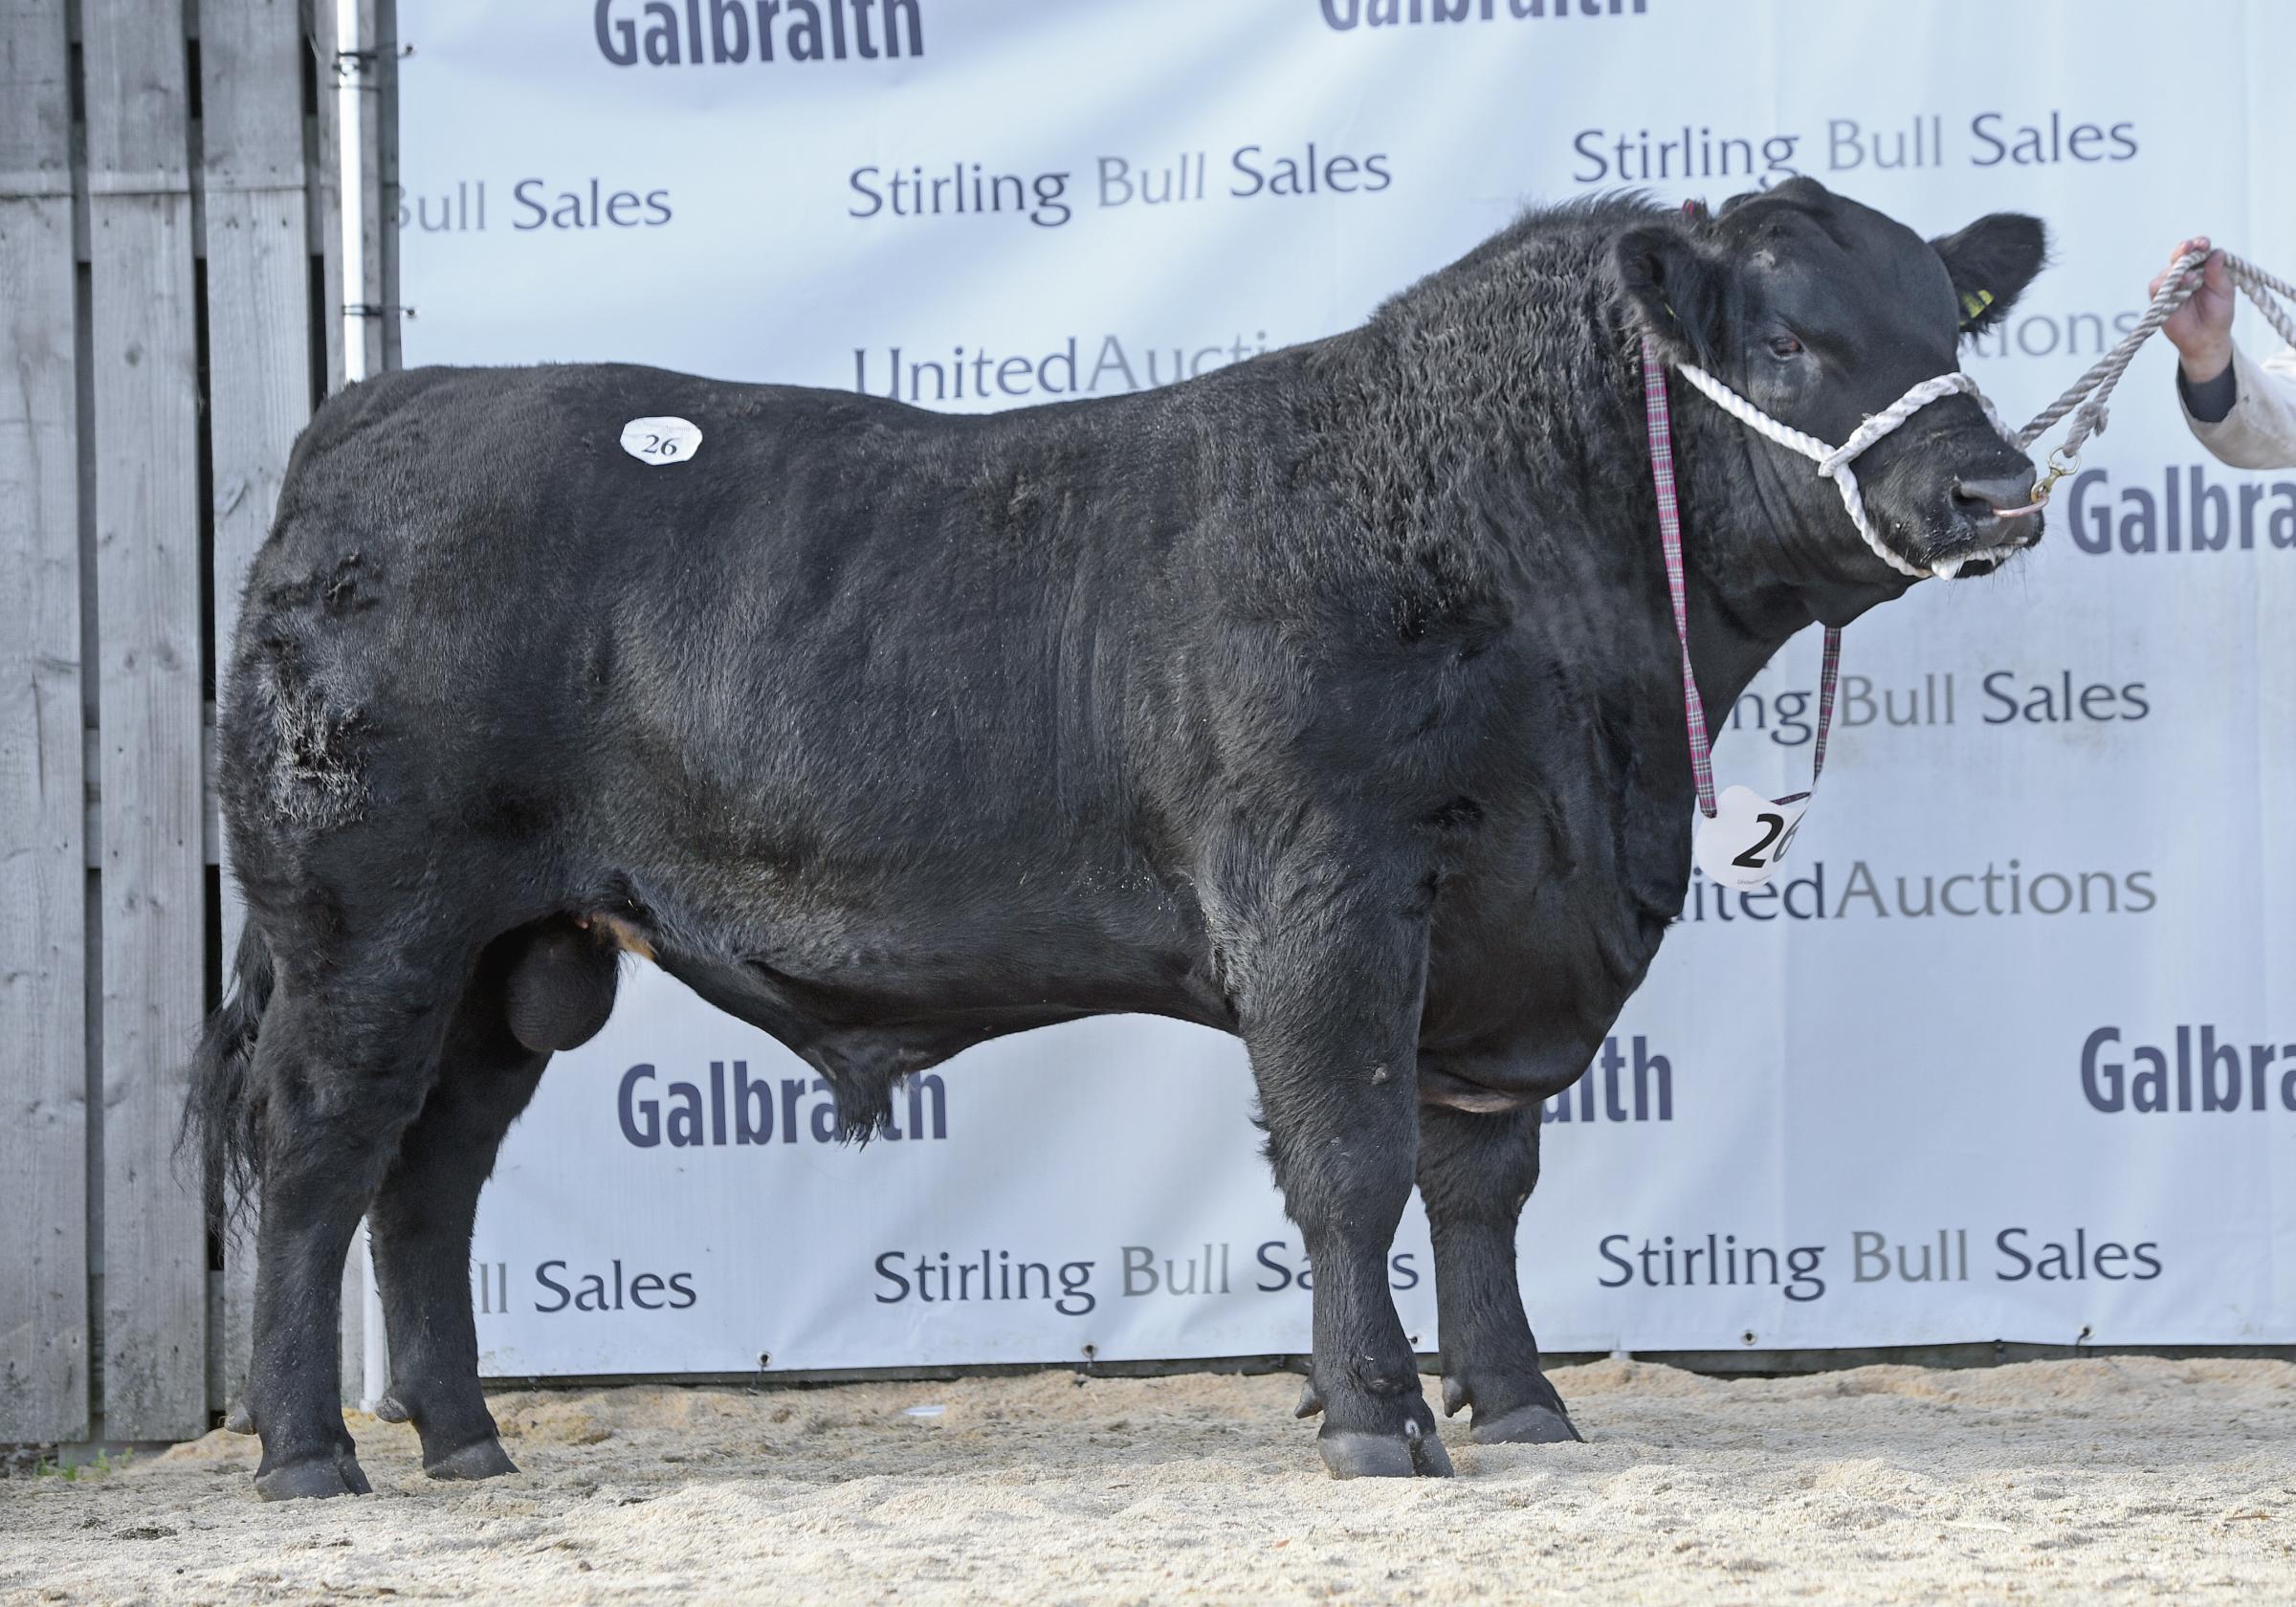 The Grays sold this bull for 12,000gns 